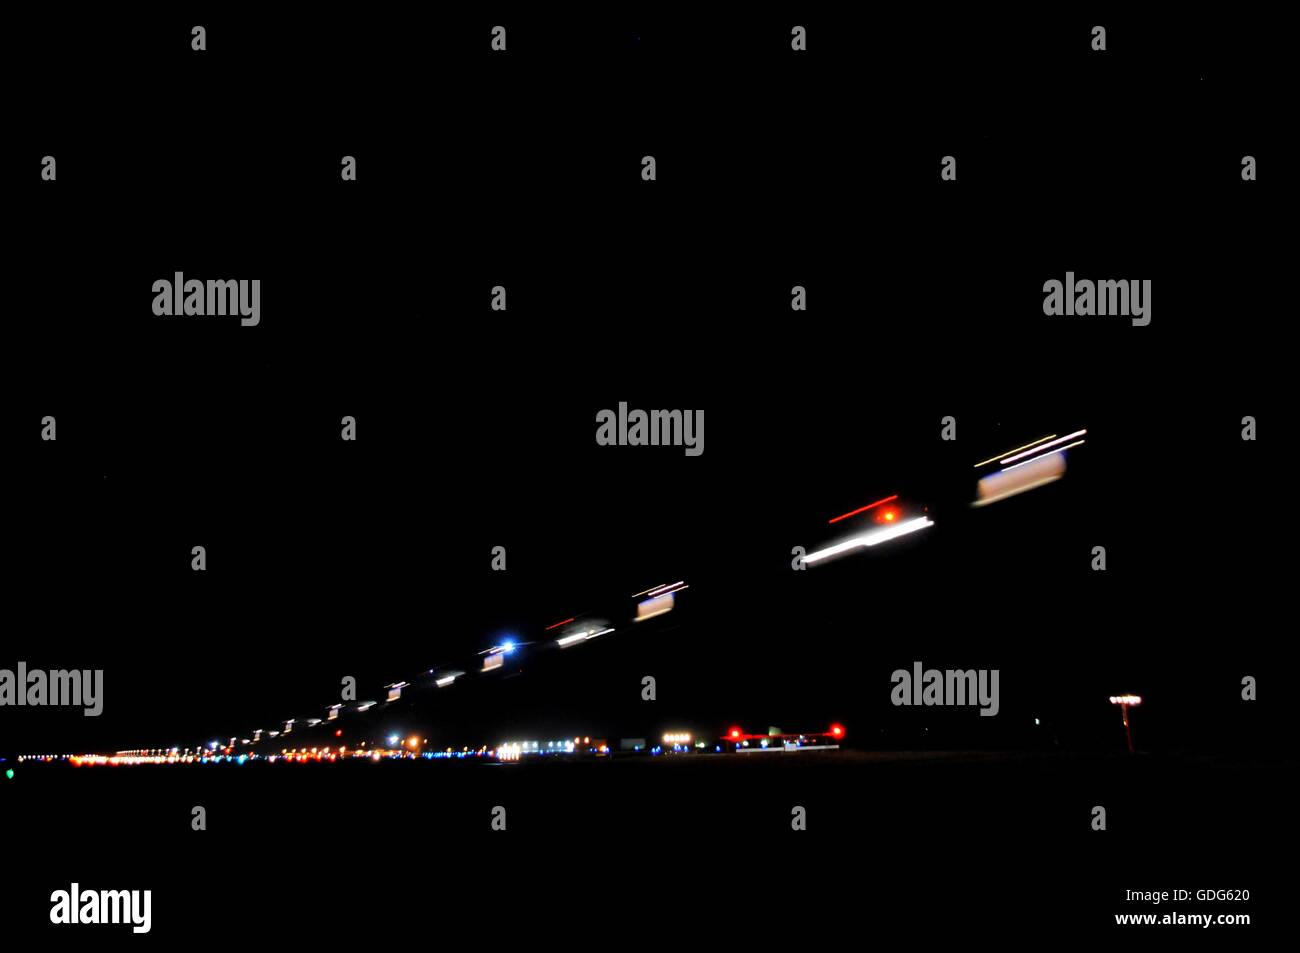 Layered exposures of an airplane landing Stock Photo